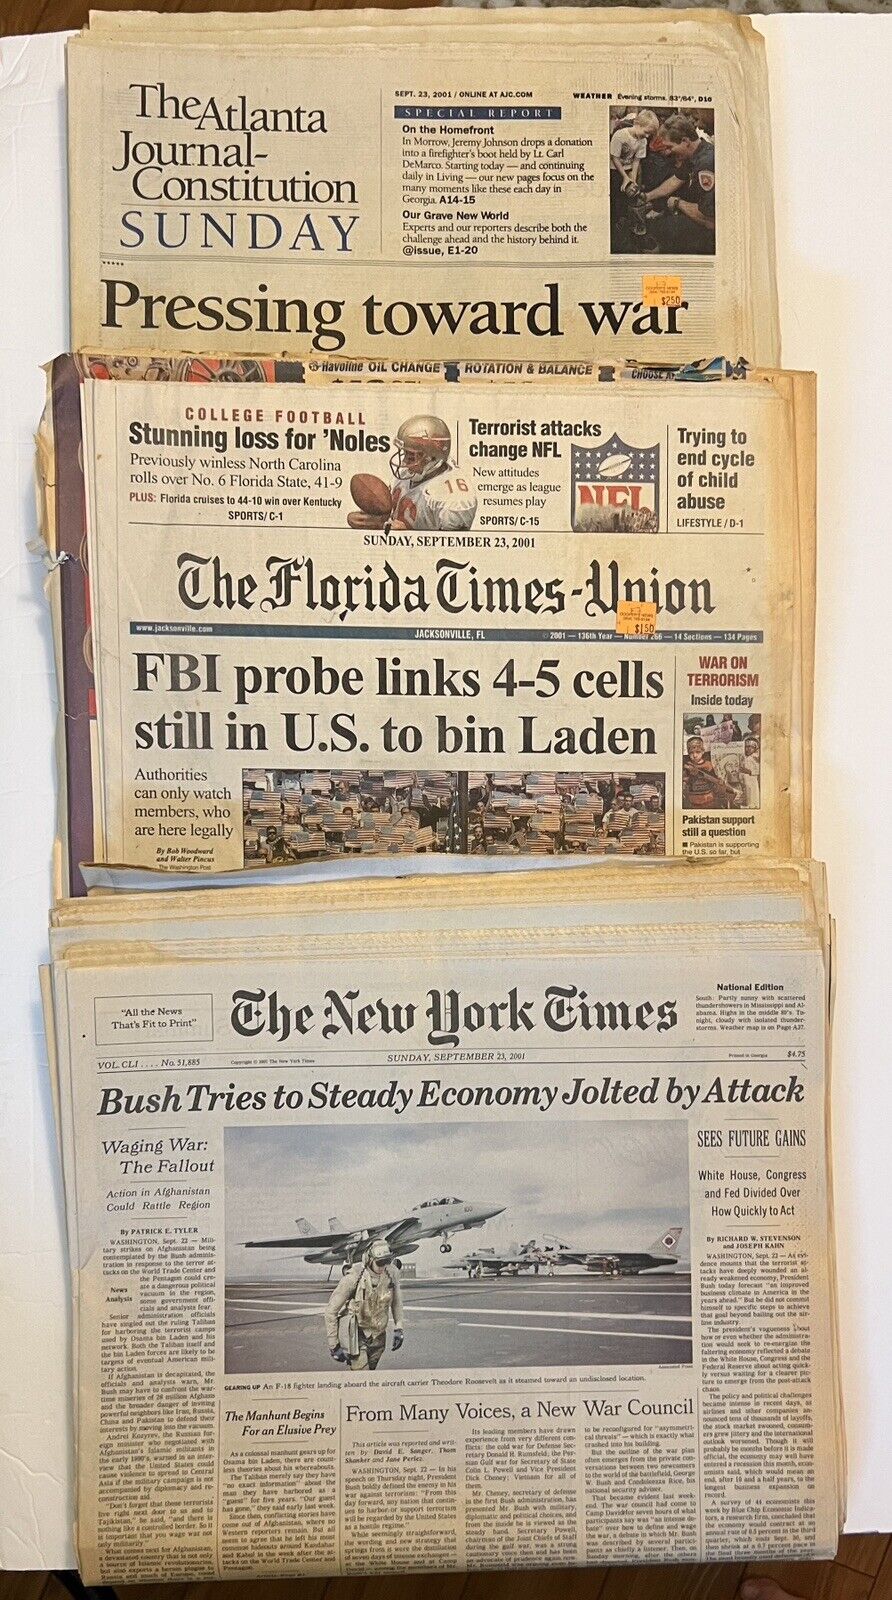 Sept 23, 2001 Sunday - 3 Different Newspapers From September 2001